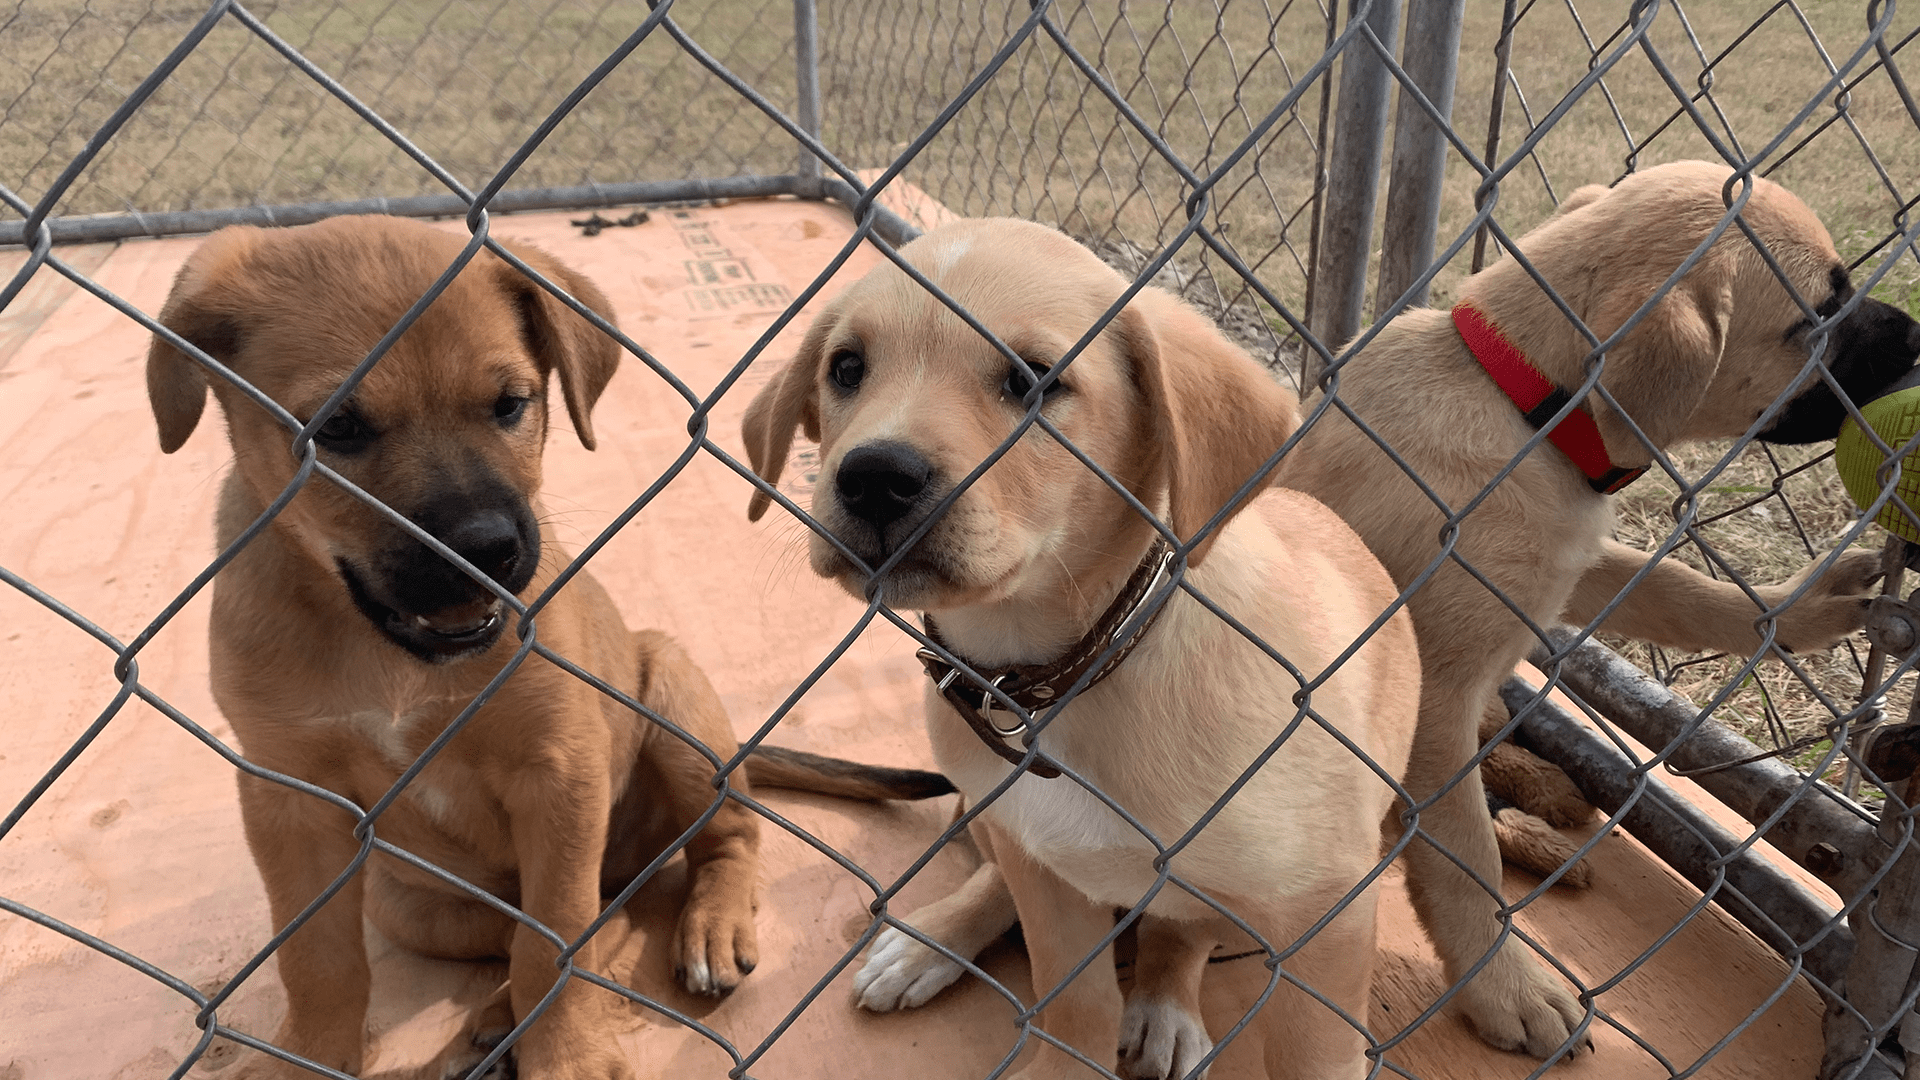 The rescue of Rez dogs: The good the bad and the ugly APTN News